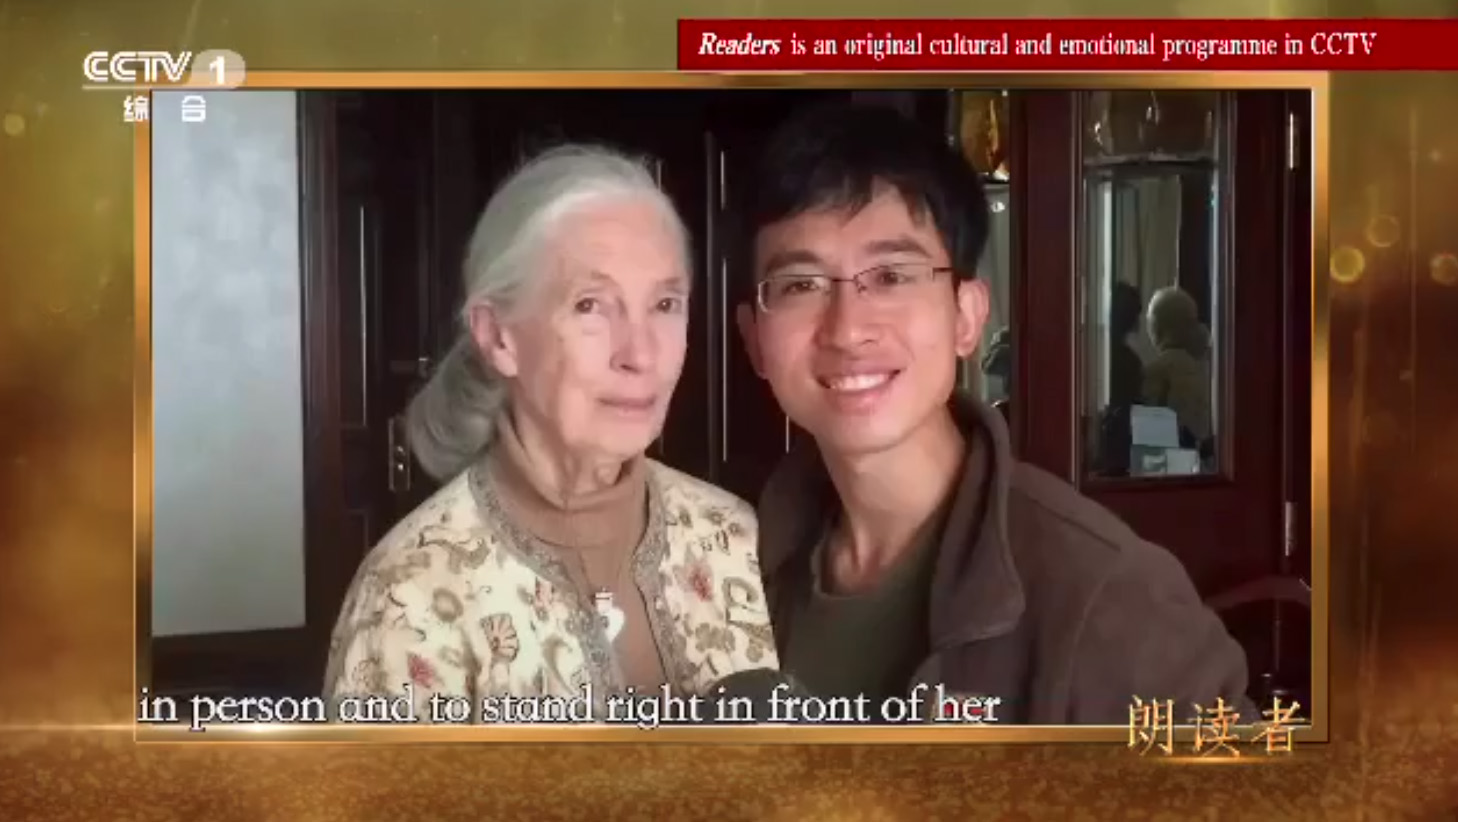 Jane Goodall Debuts on China's Cultural Program "The Reader"